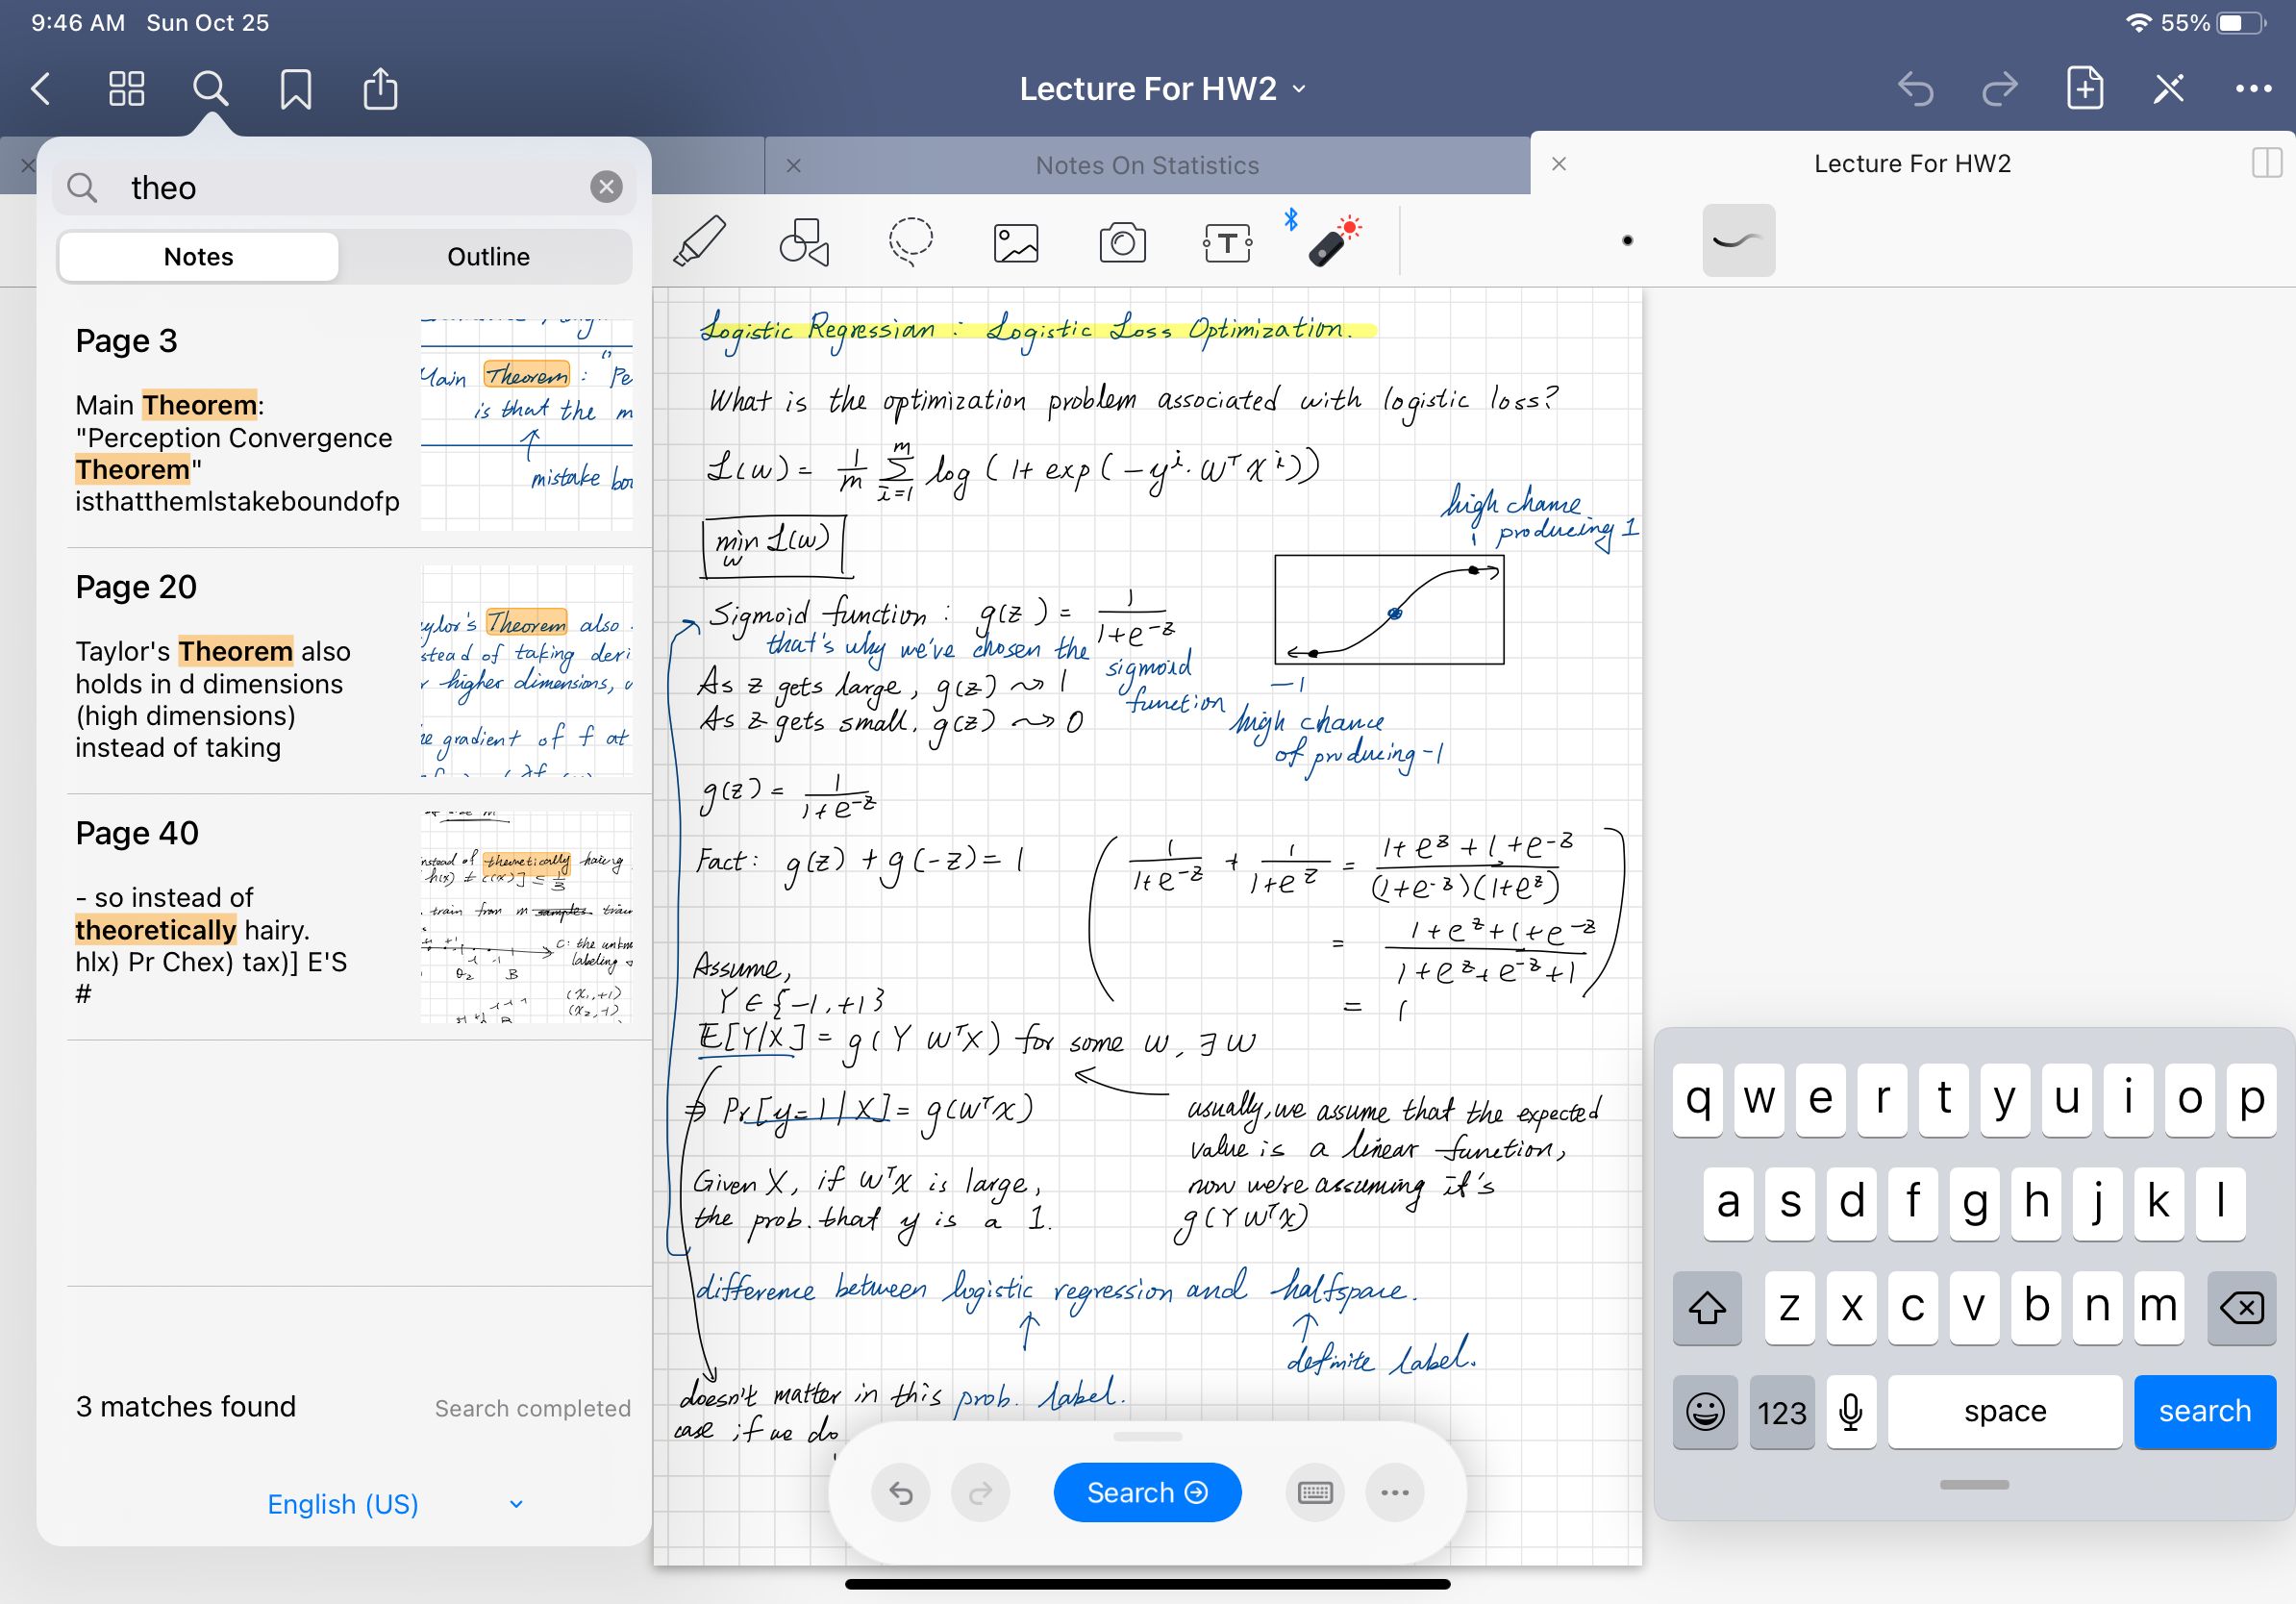 key-ways-to-take-better-notes-using-goodnotes-on-the-ipad-by-jenn